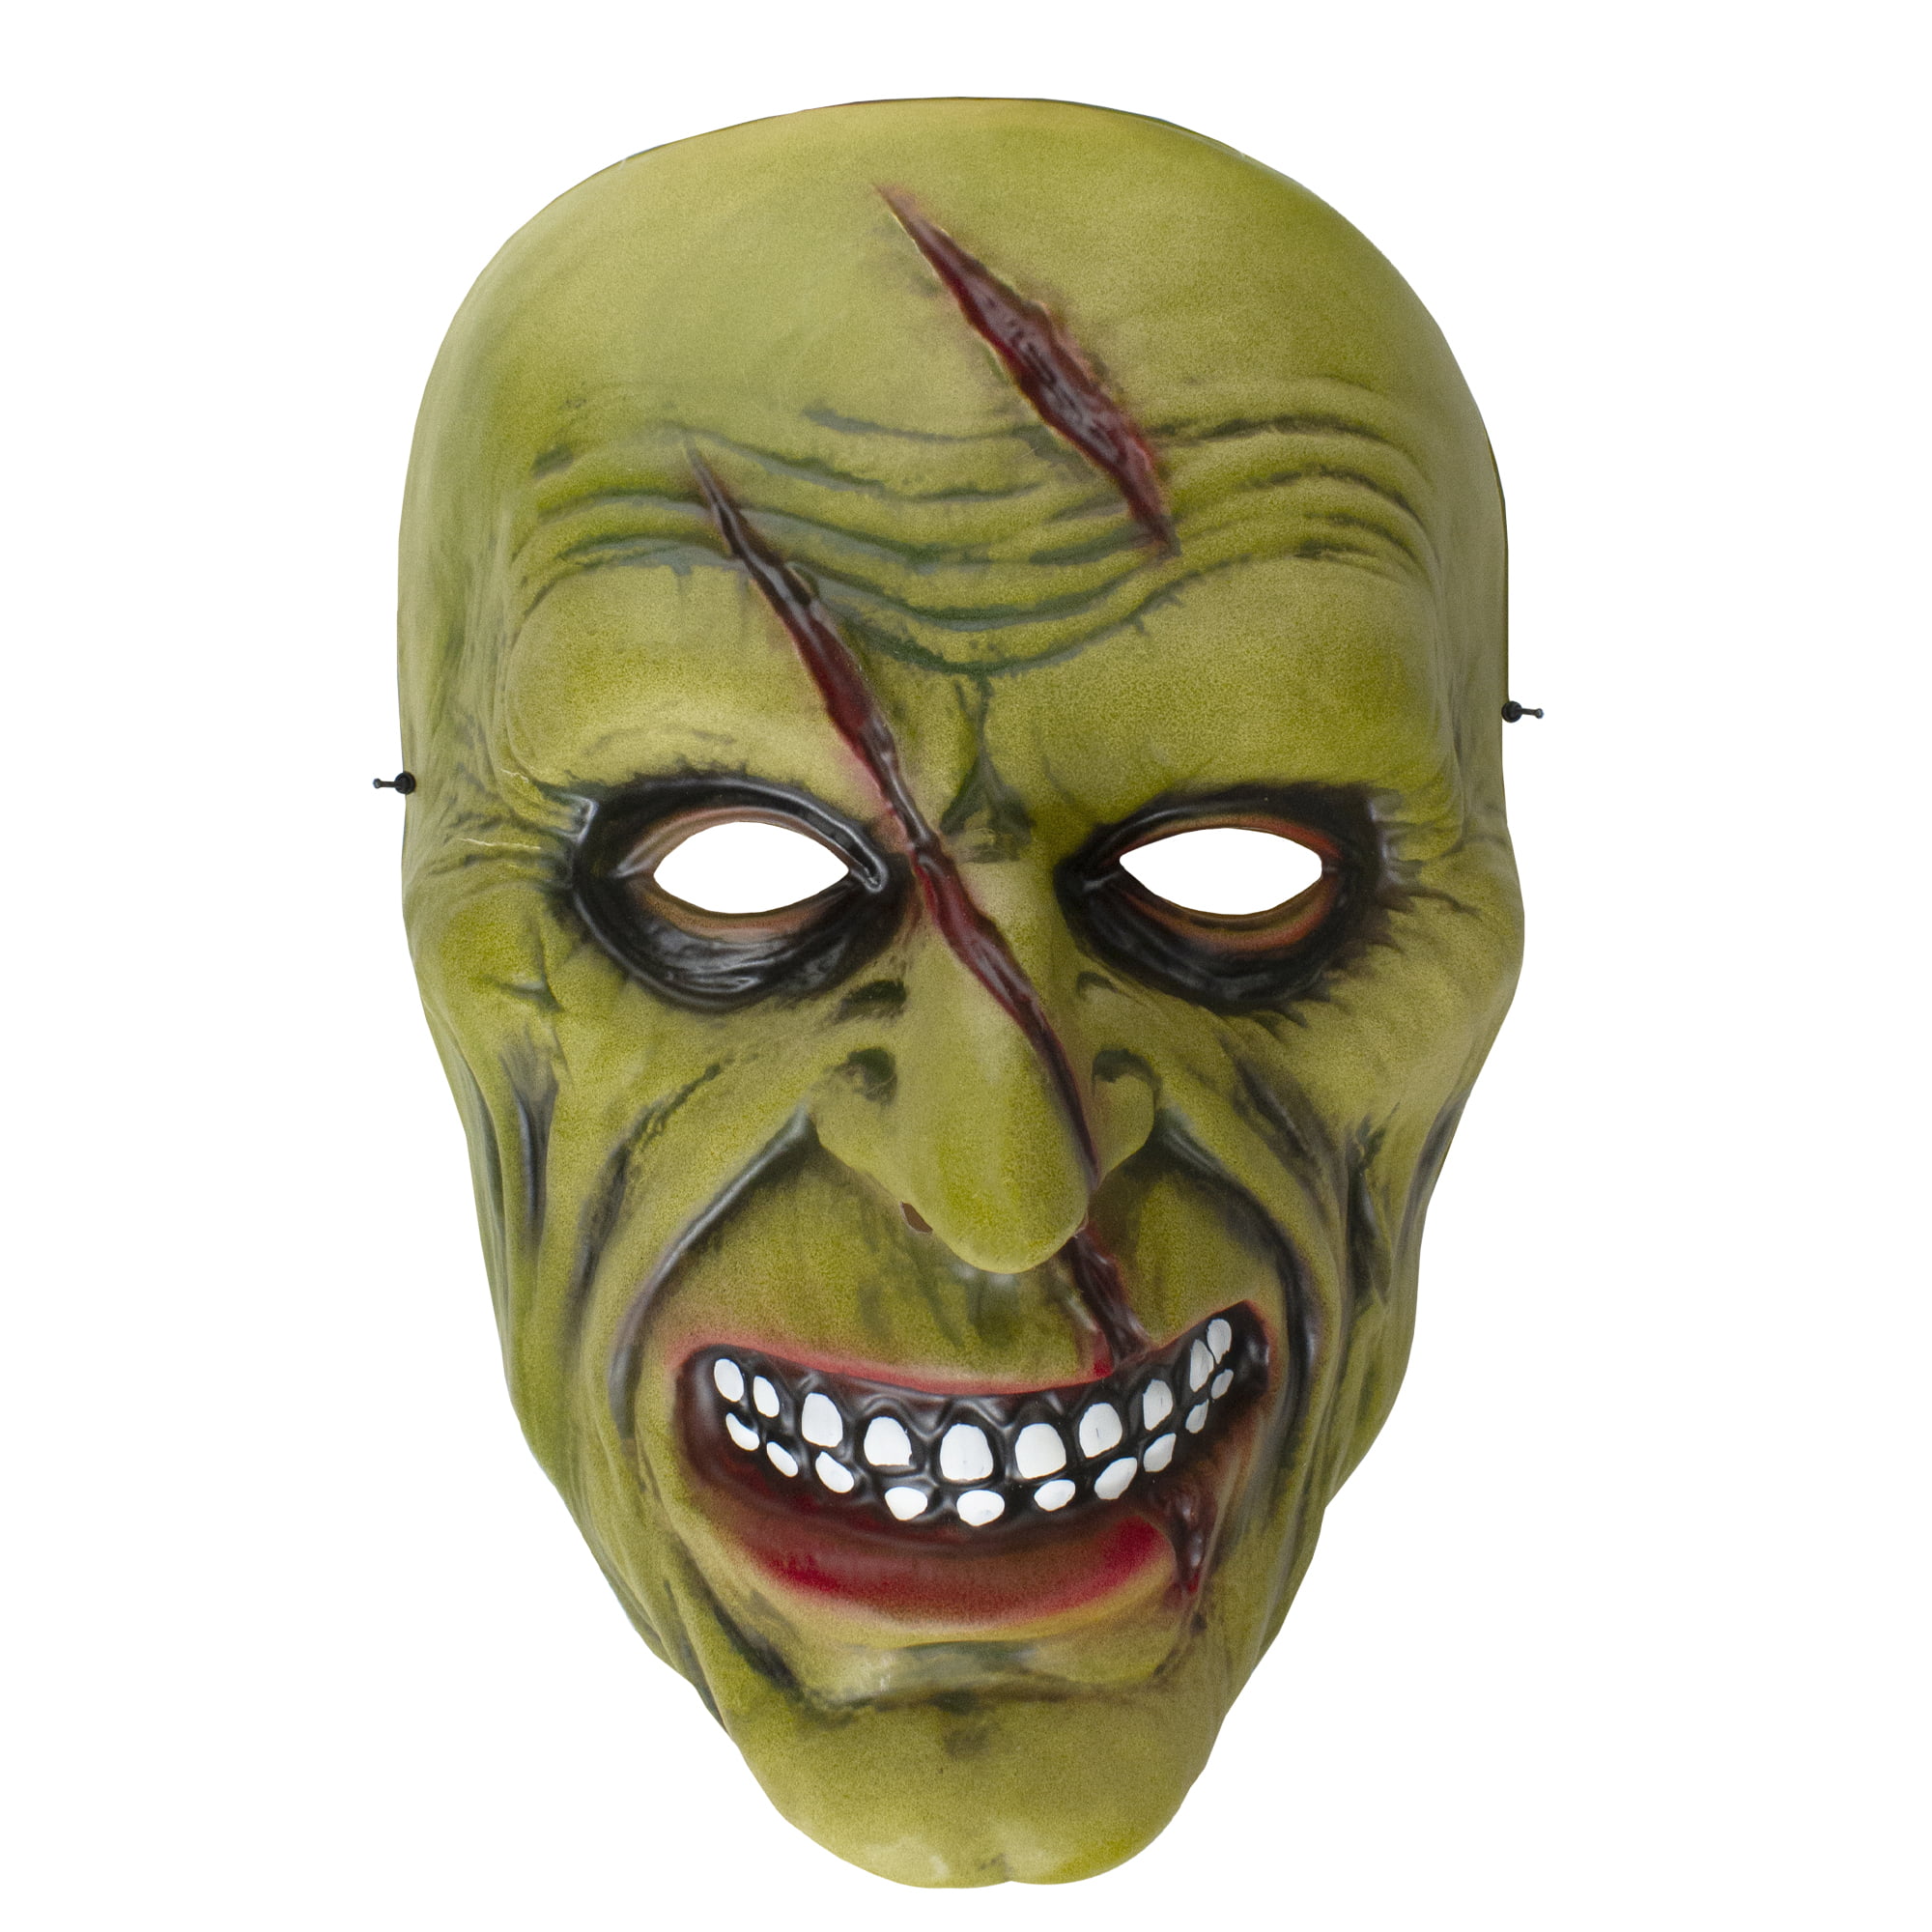 Details about   Burnt zombie Halloween mask adult size new 